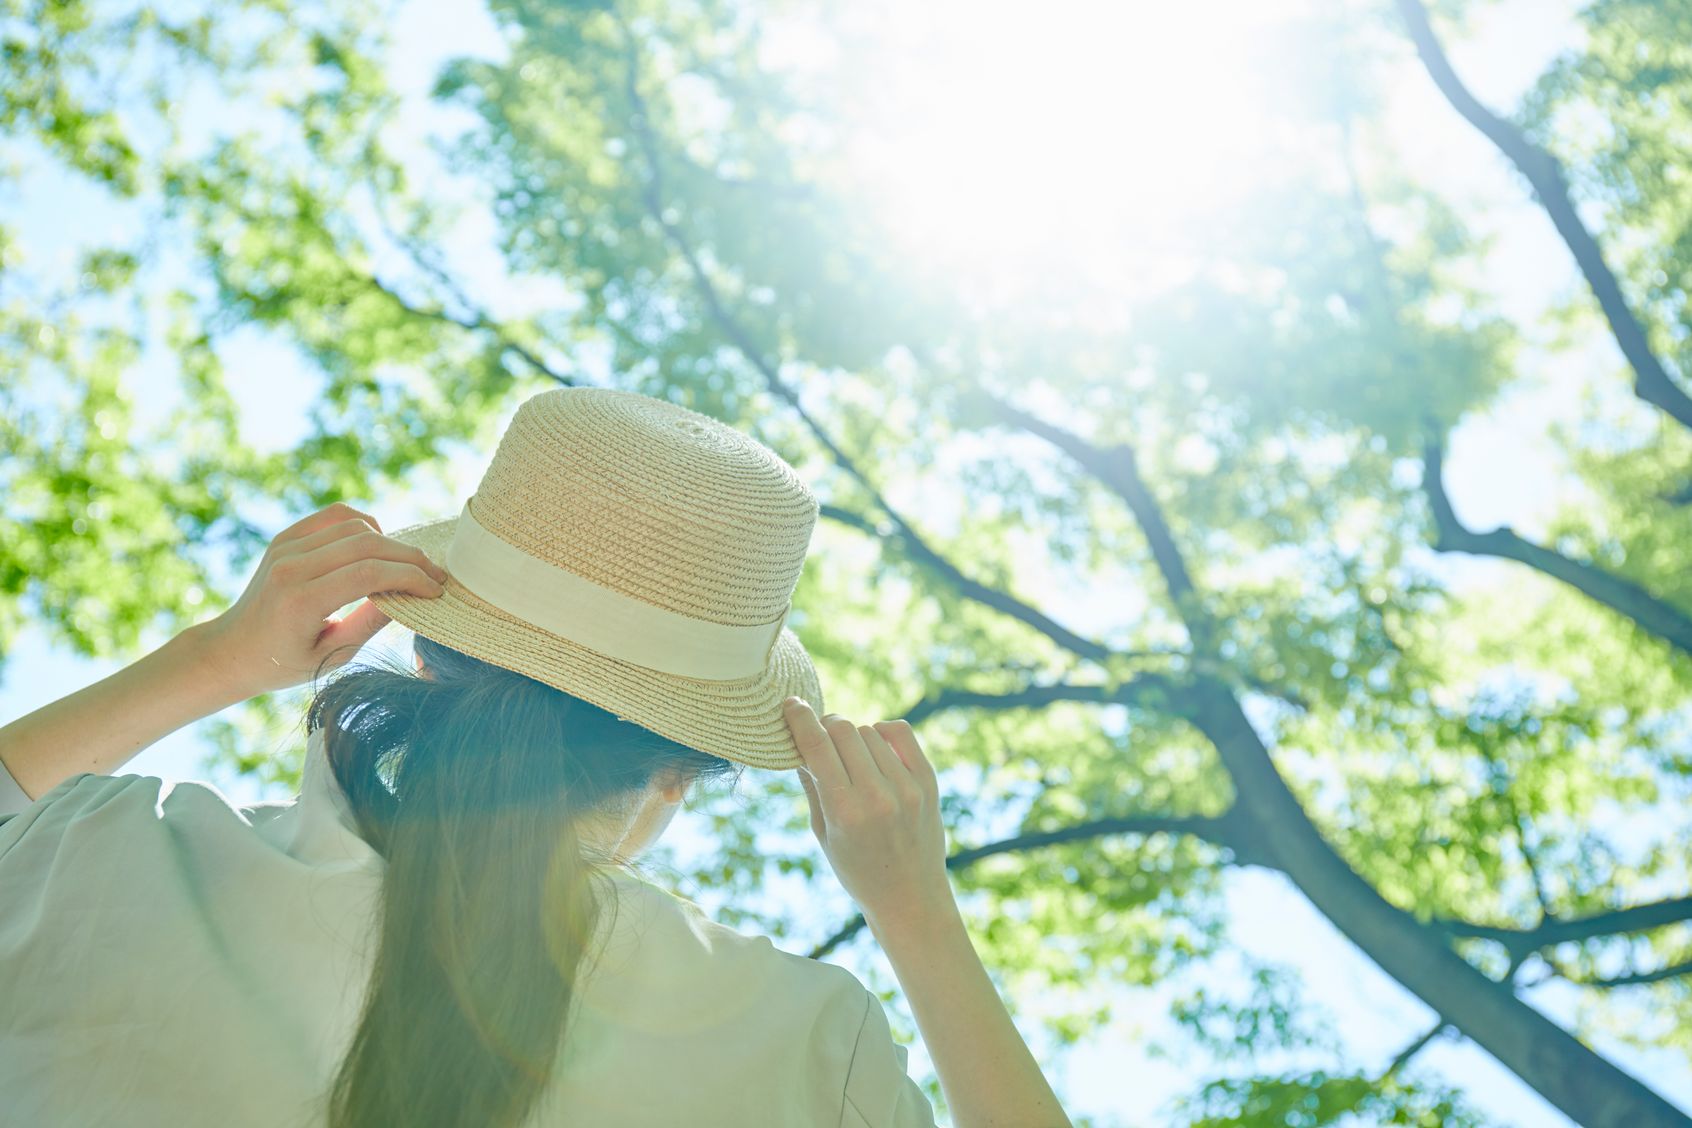 Woman looking at sun wearing a hat practicing UV safety measures